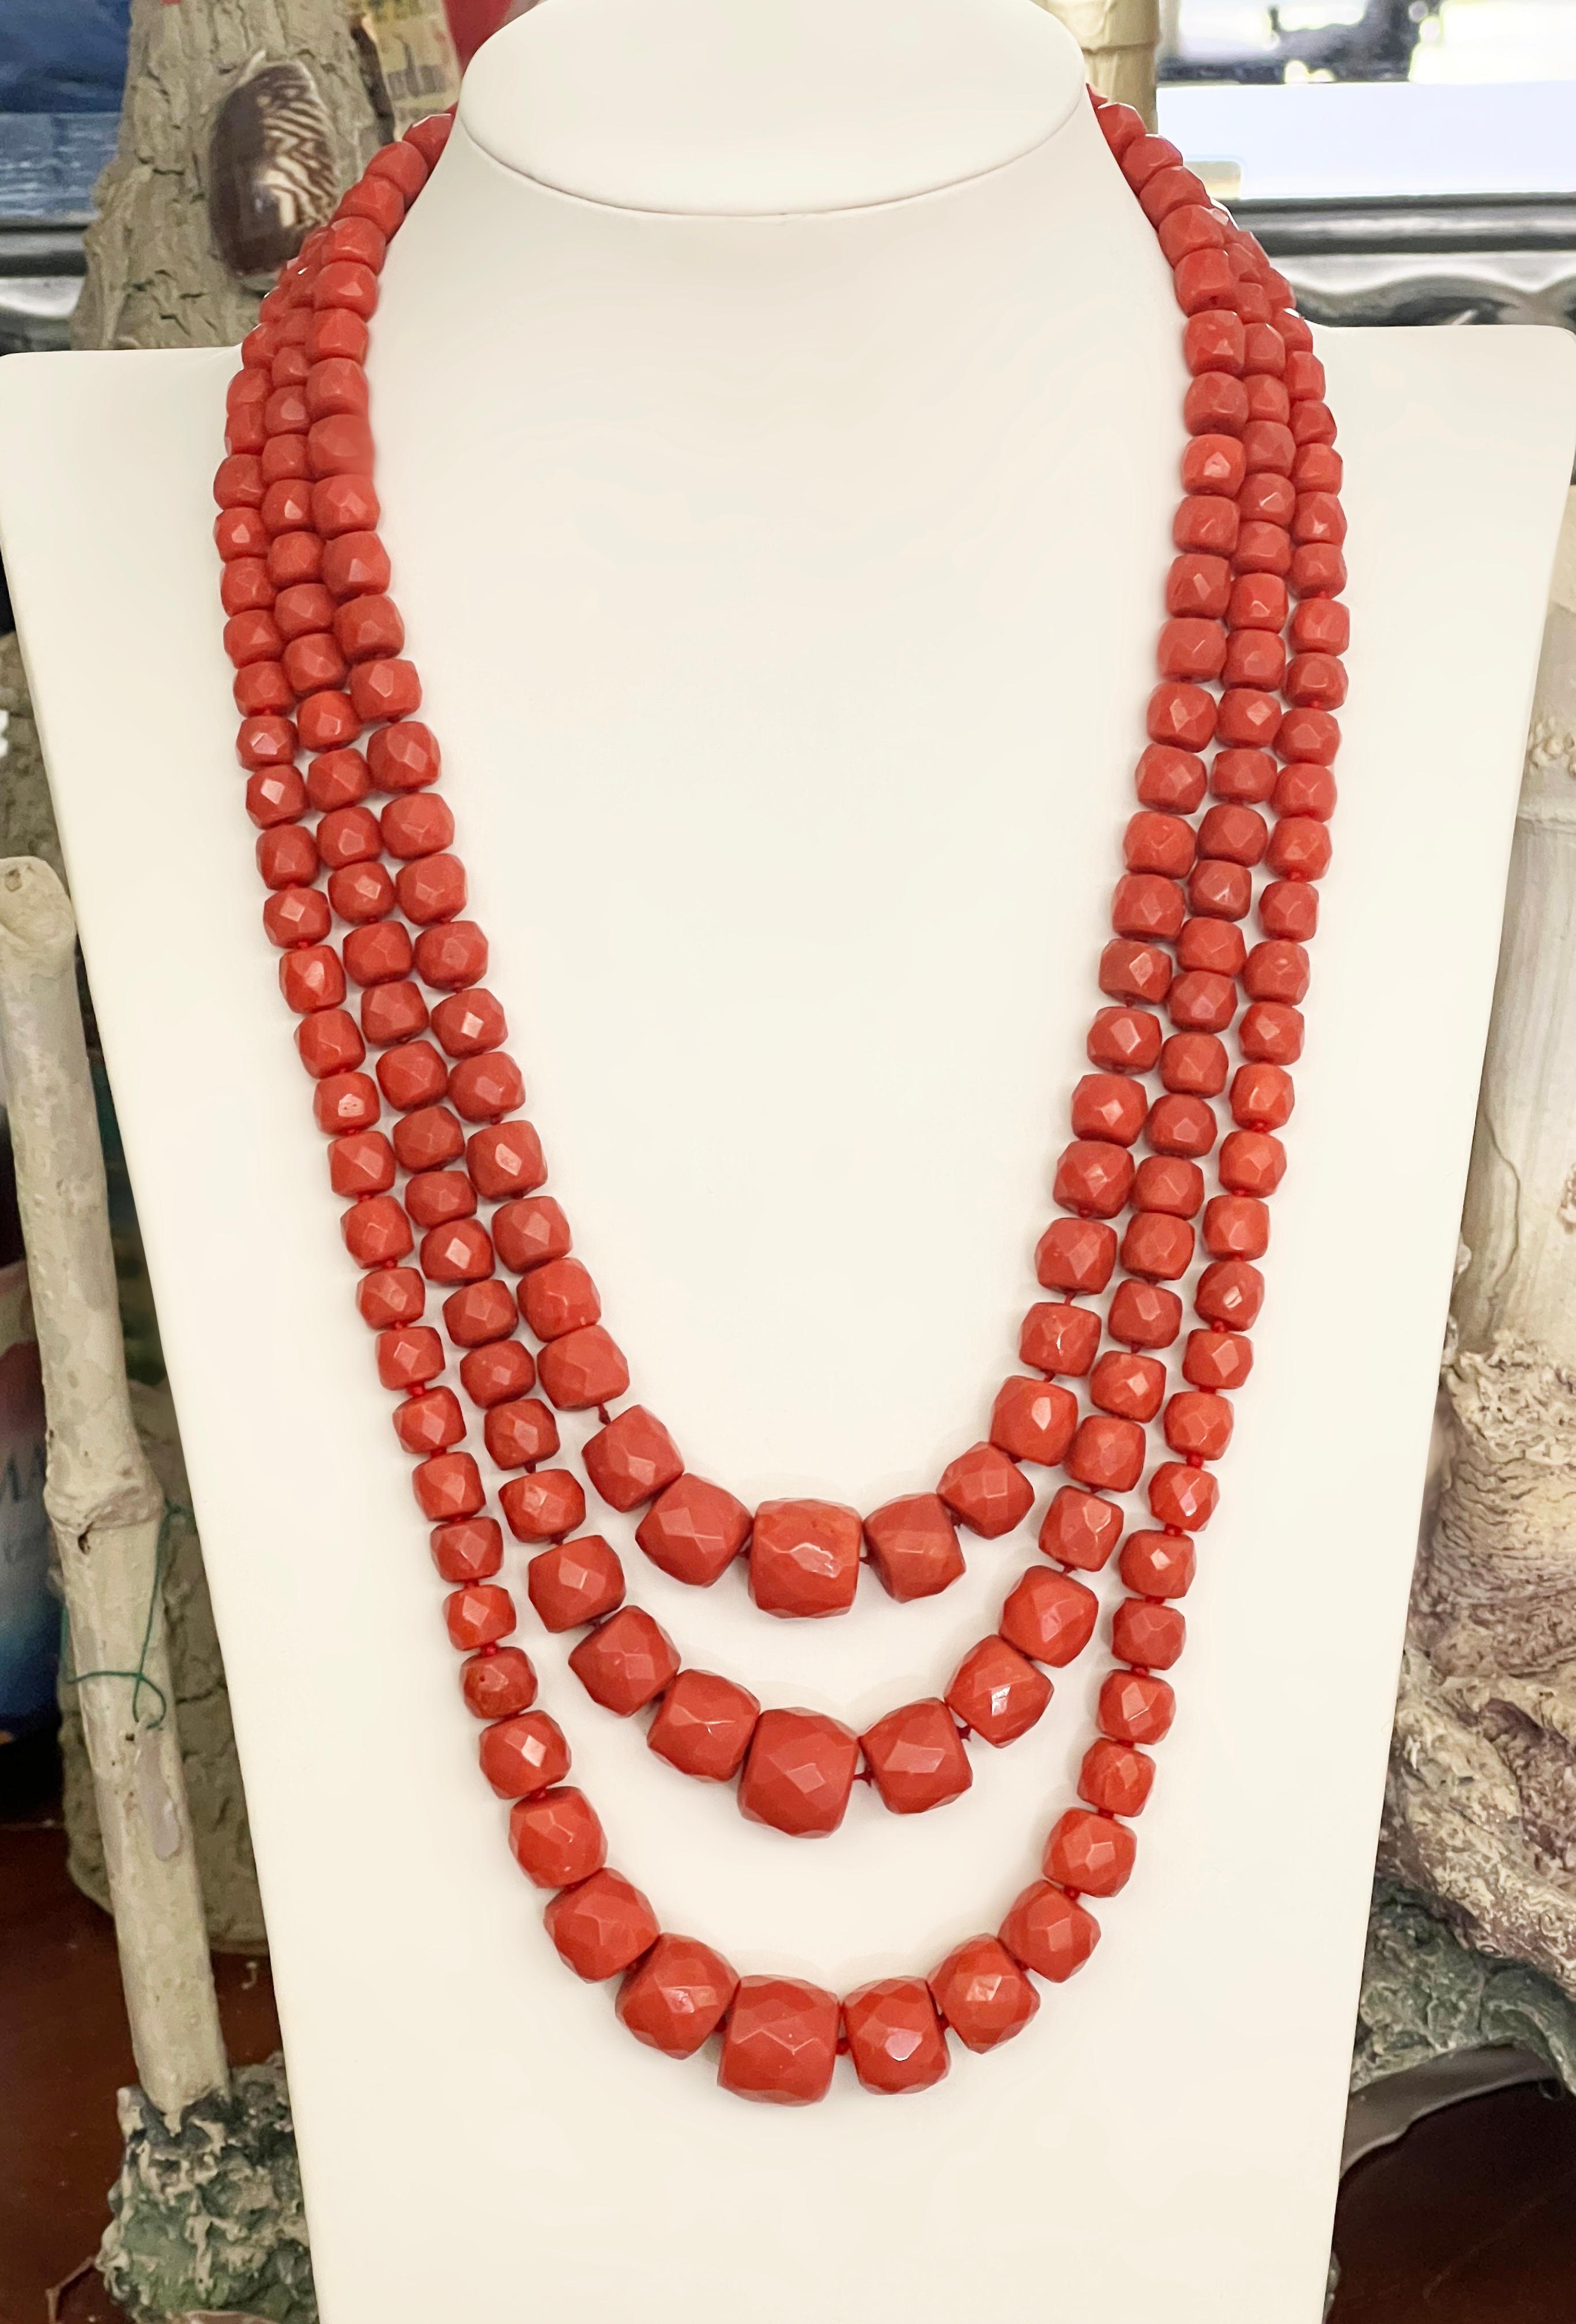 This striking necklace features multiple strands of richly hued Sardinian coral, known for its vivid color and prized throughout history for its natural beauty. The coral beads are meticulously shaped and polished, creating a luxurious cascade of